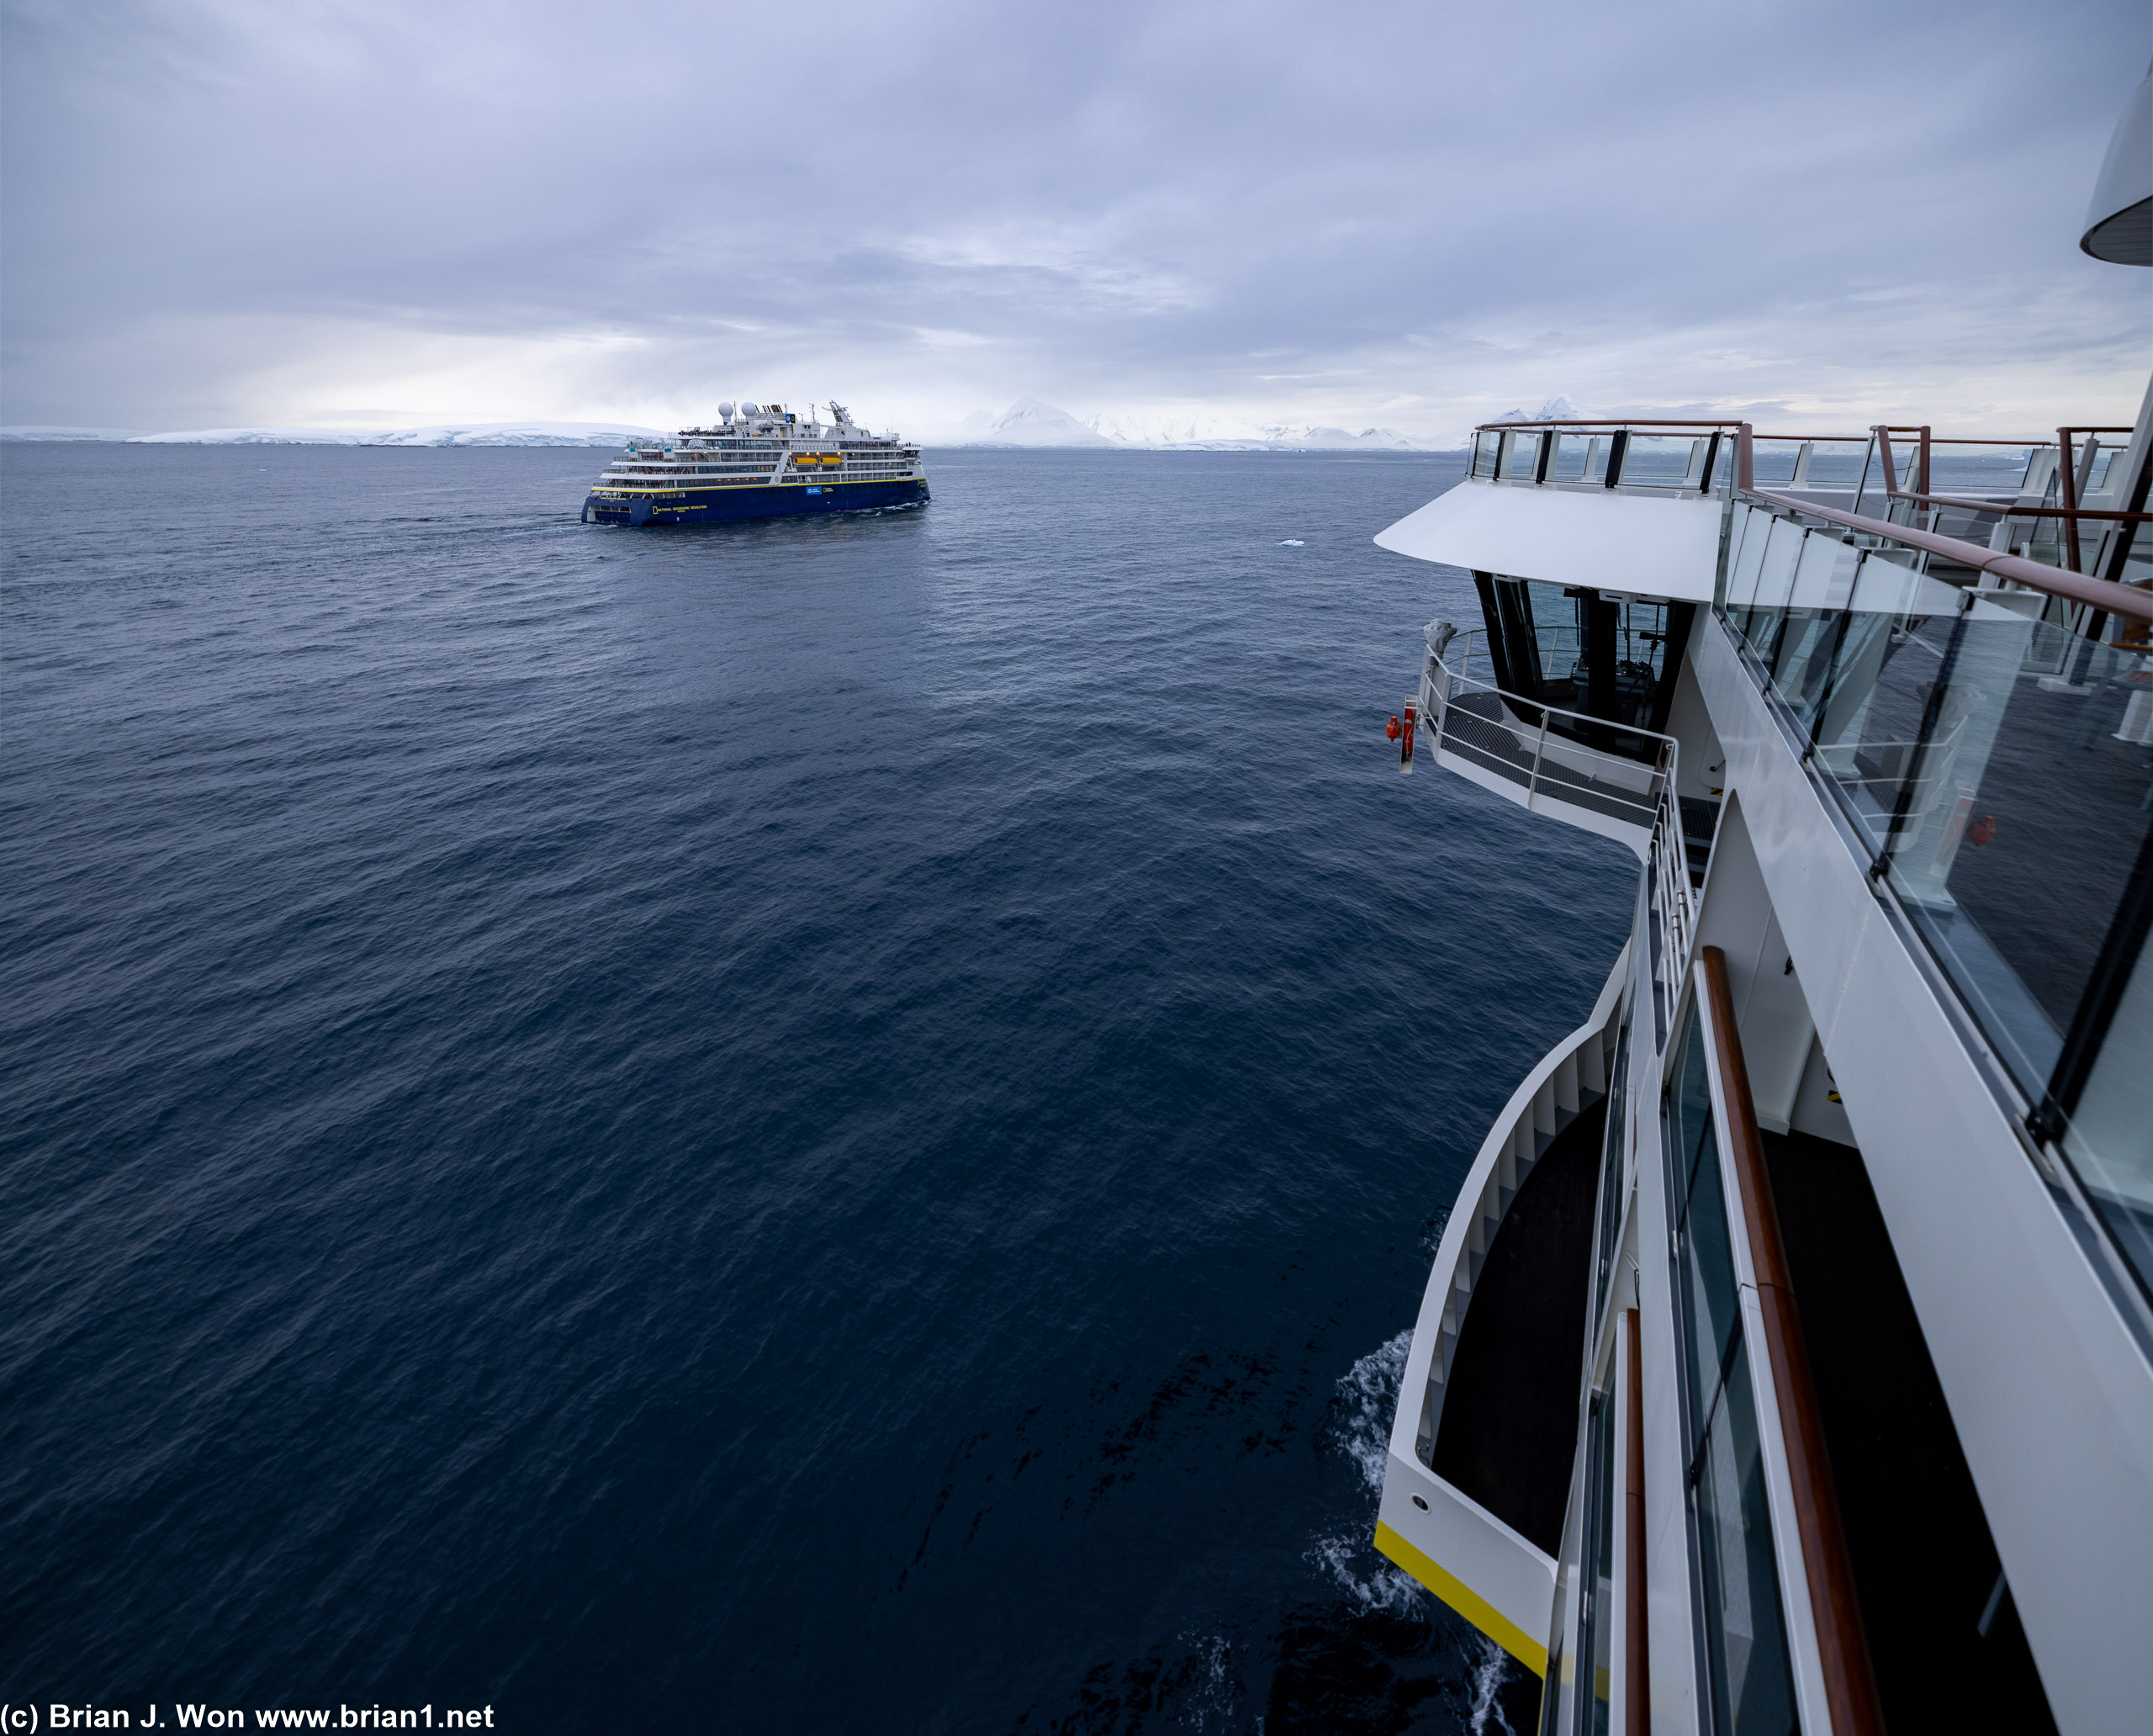 Out of the Lemaire Channel, the National Geographic Resolution prepares to turn to port and to continue their journey south.